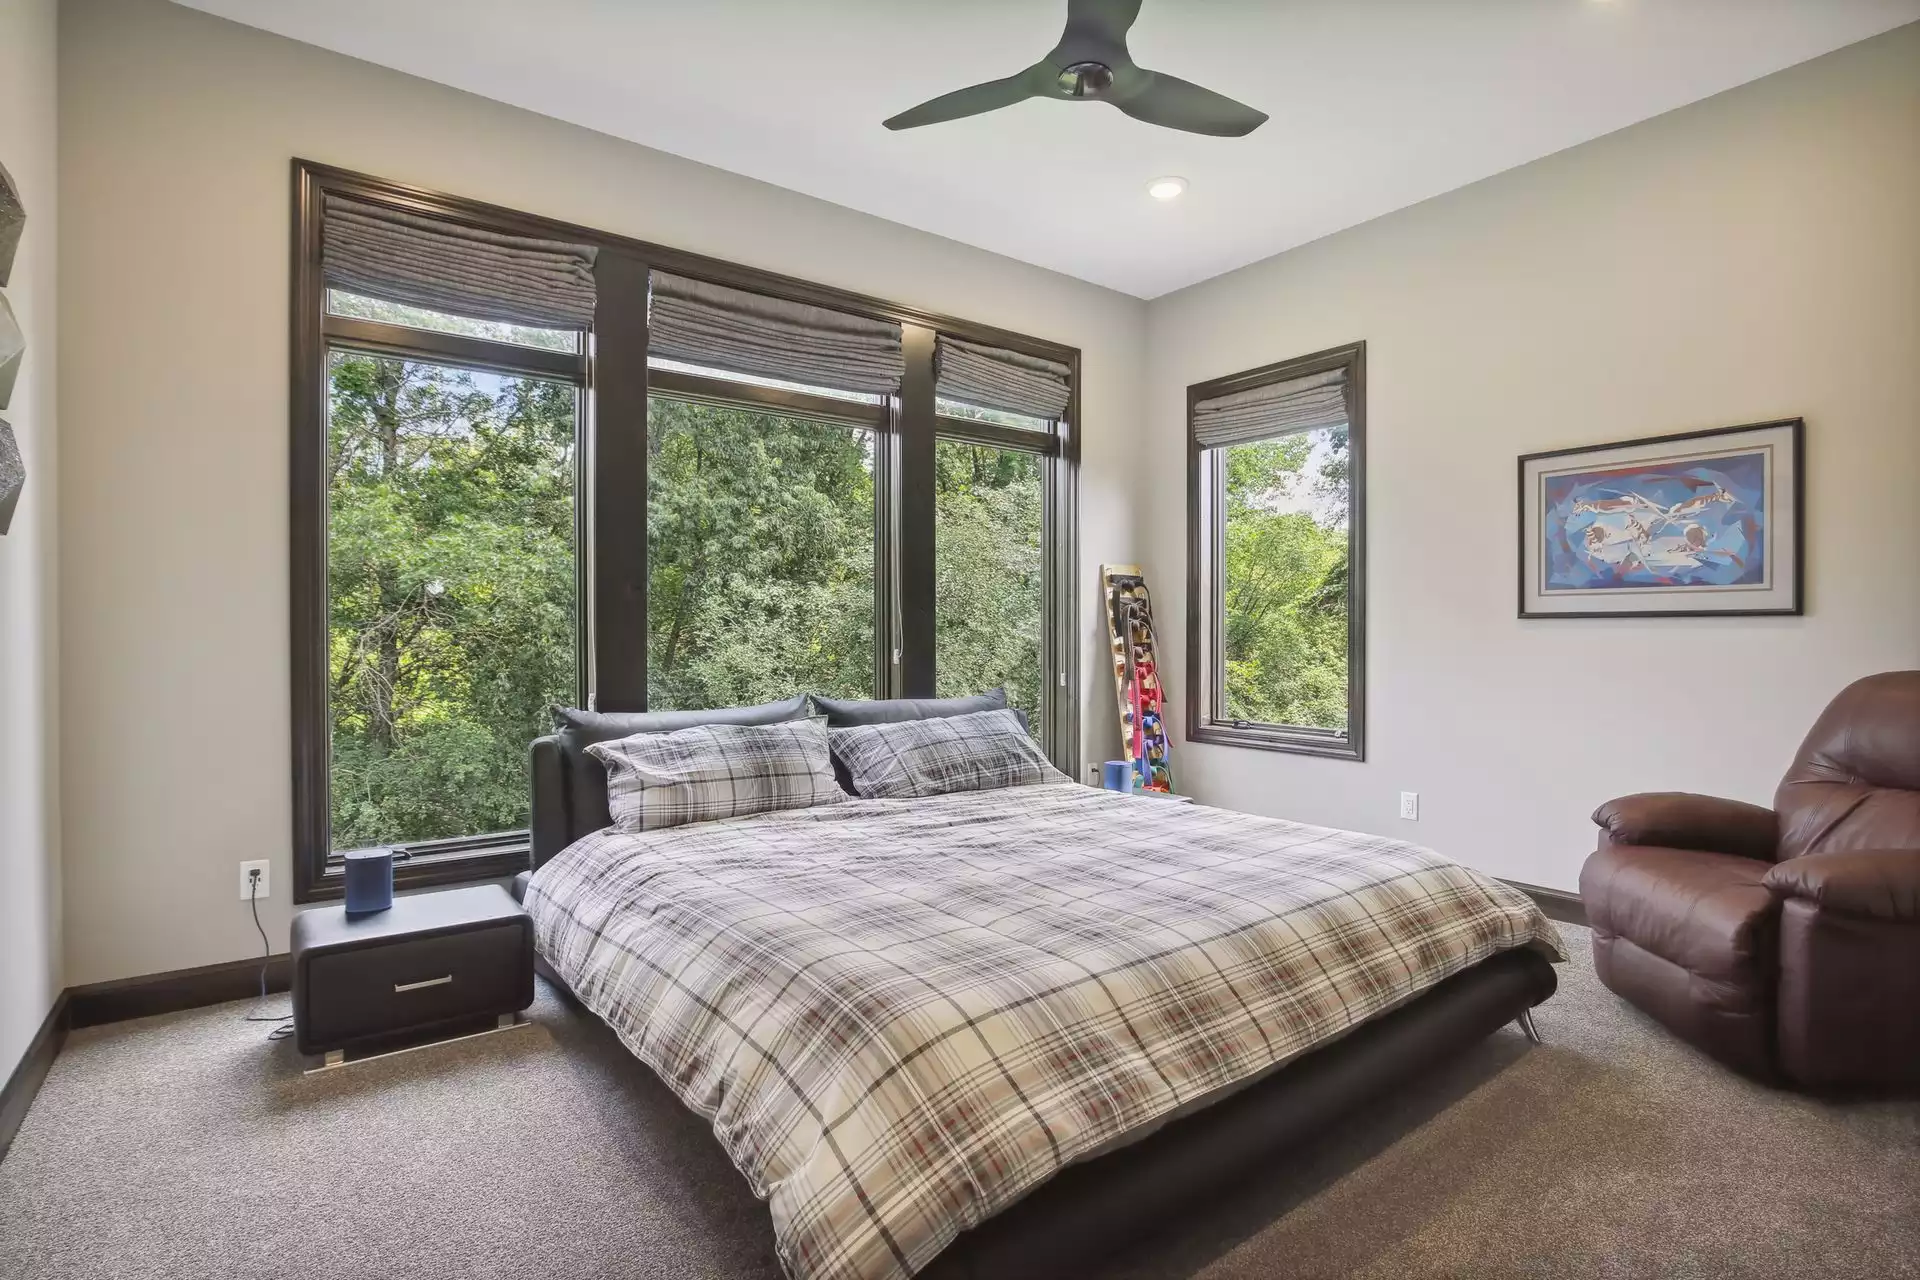 Bedroom features extra tall windows for great views